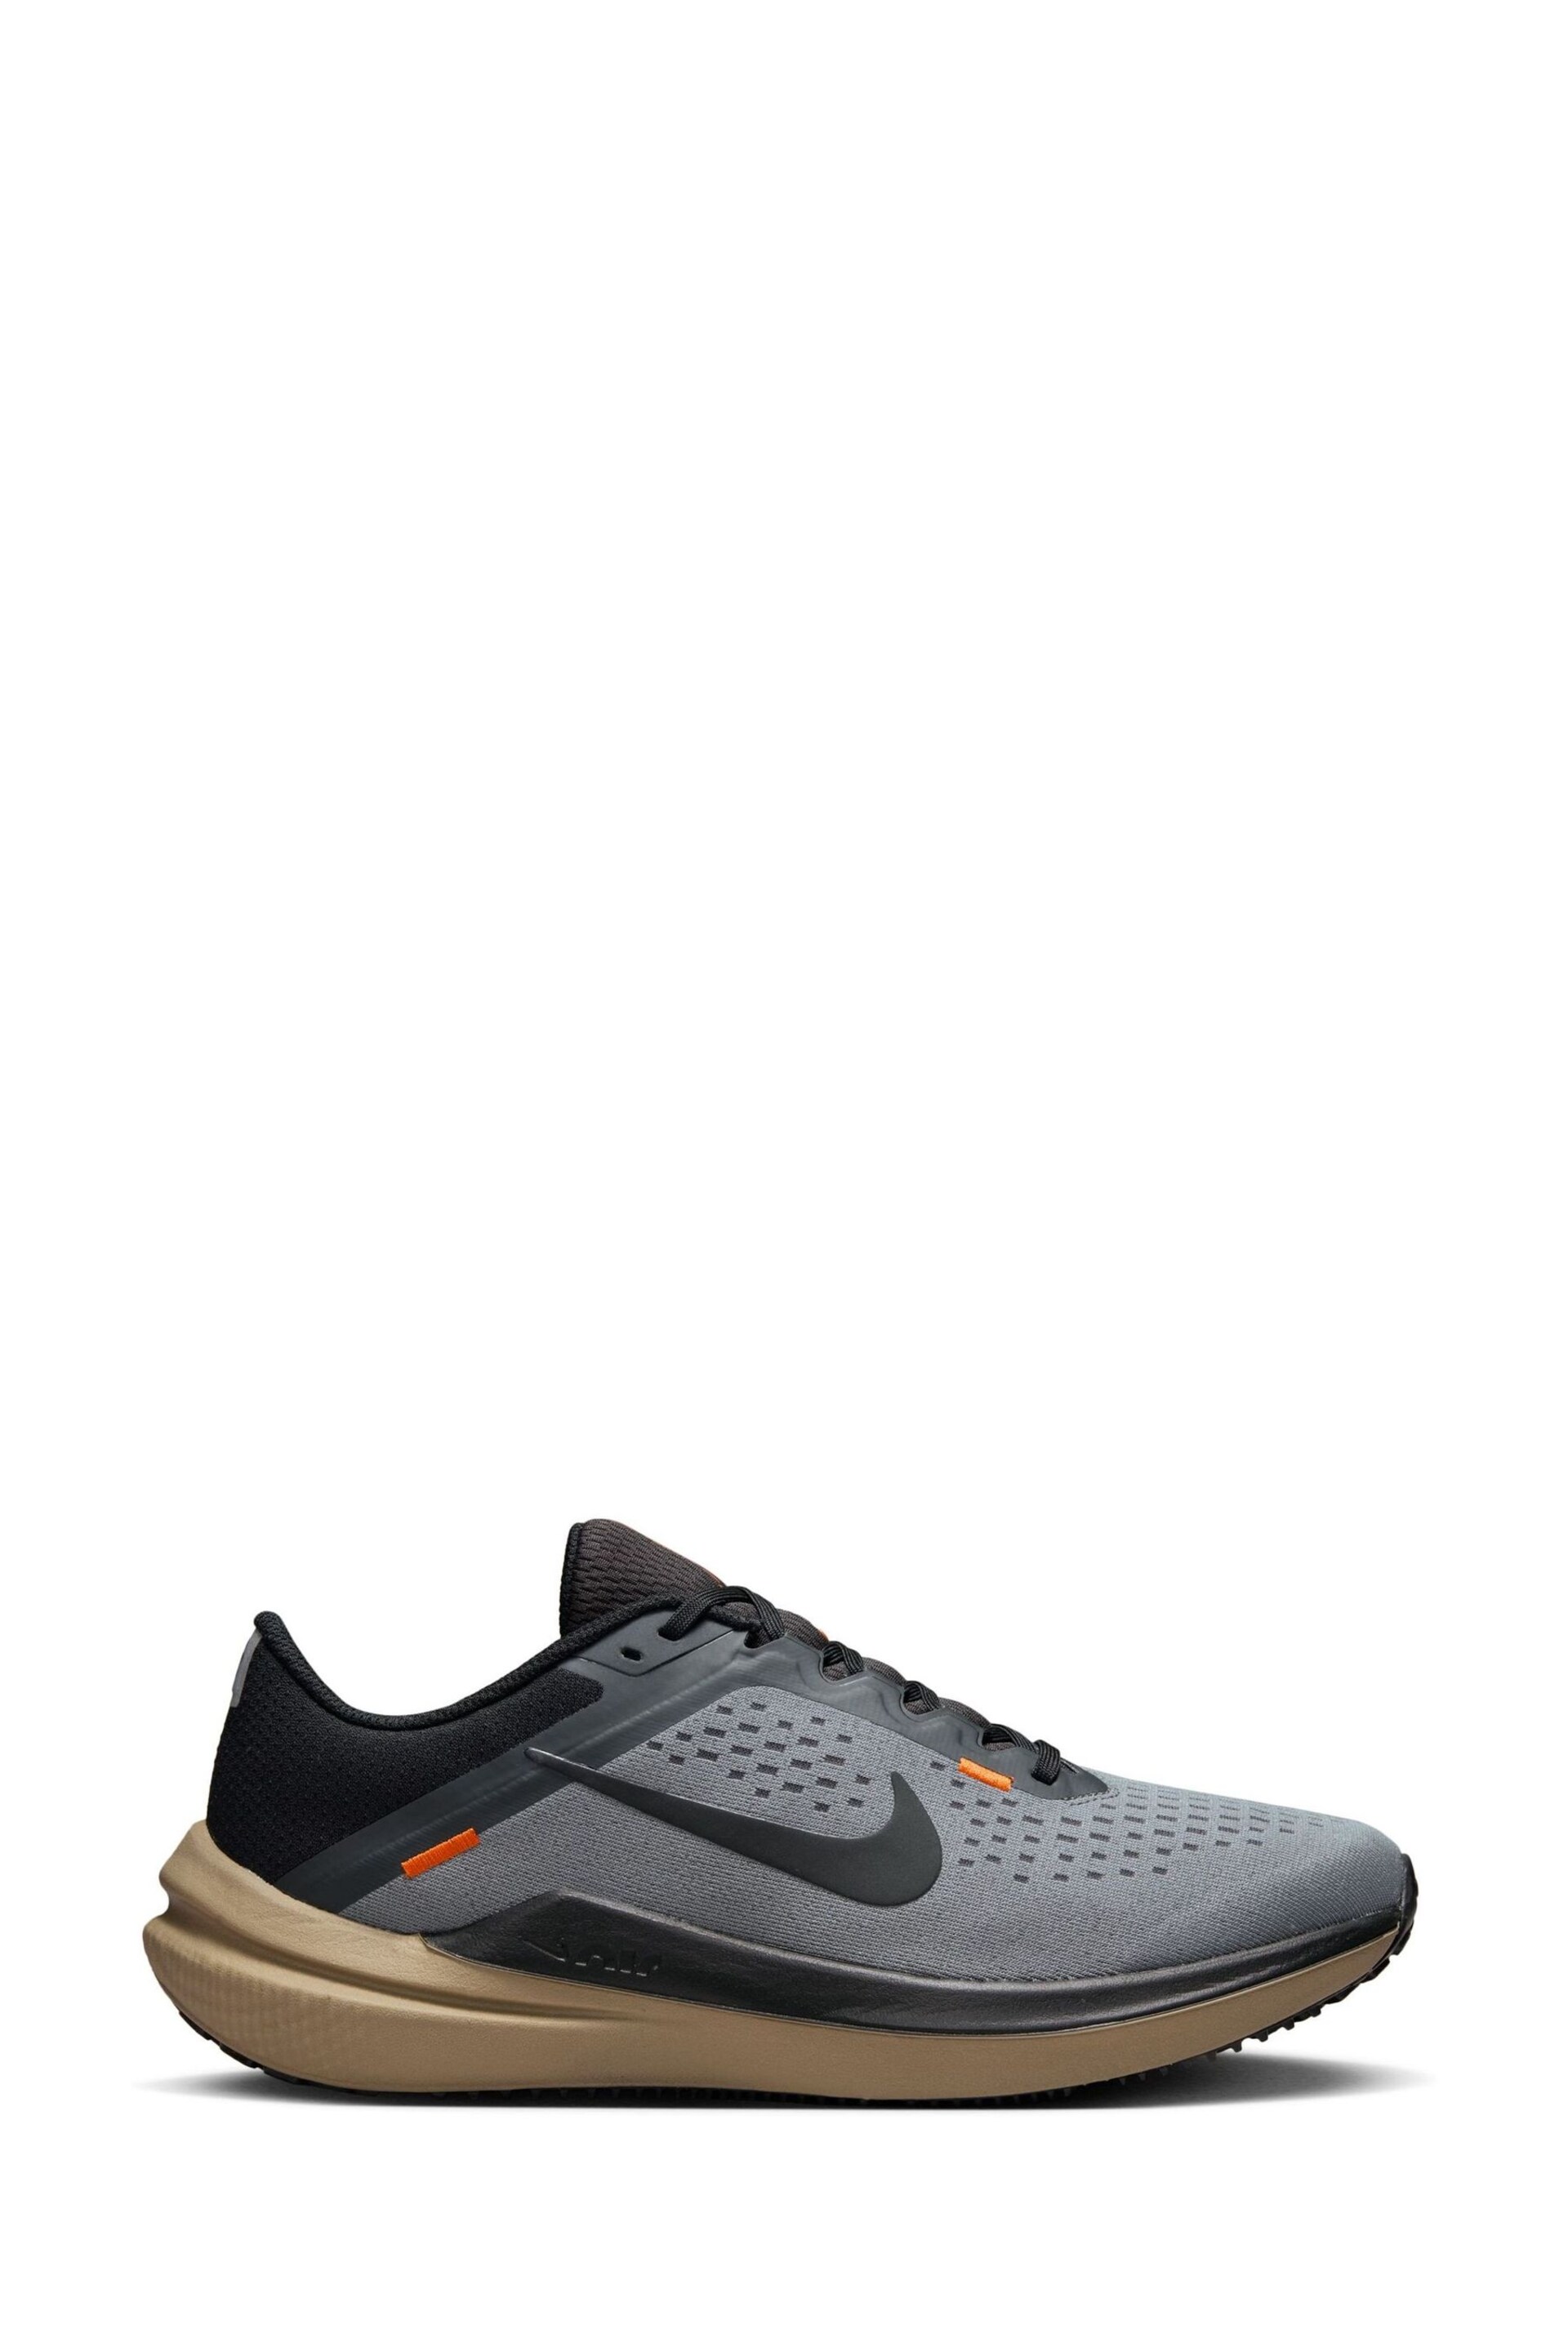 Nike Grey Air Winflo 10 Running Trainers - Image 1 of 10